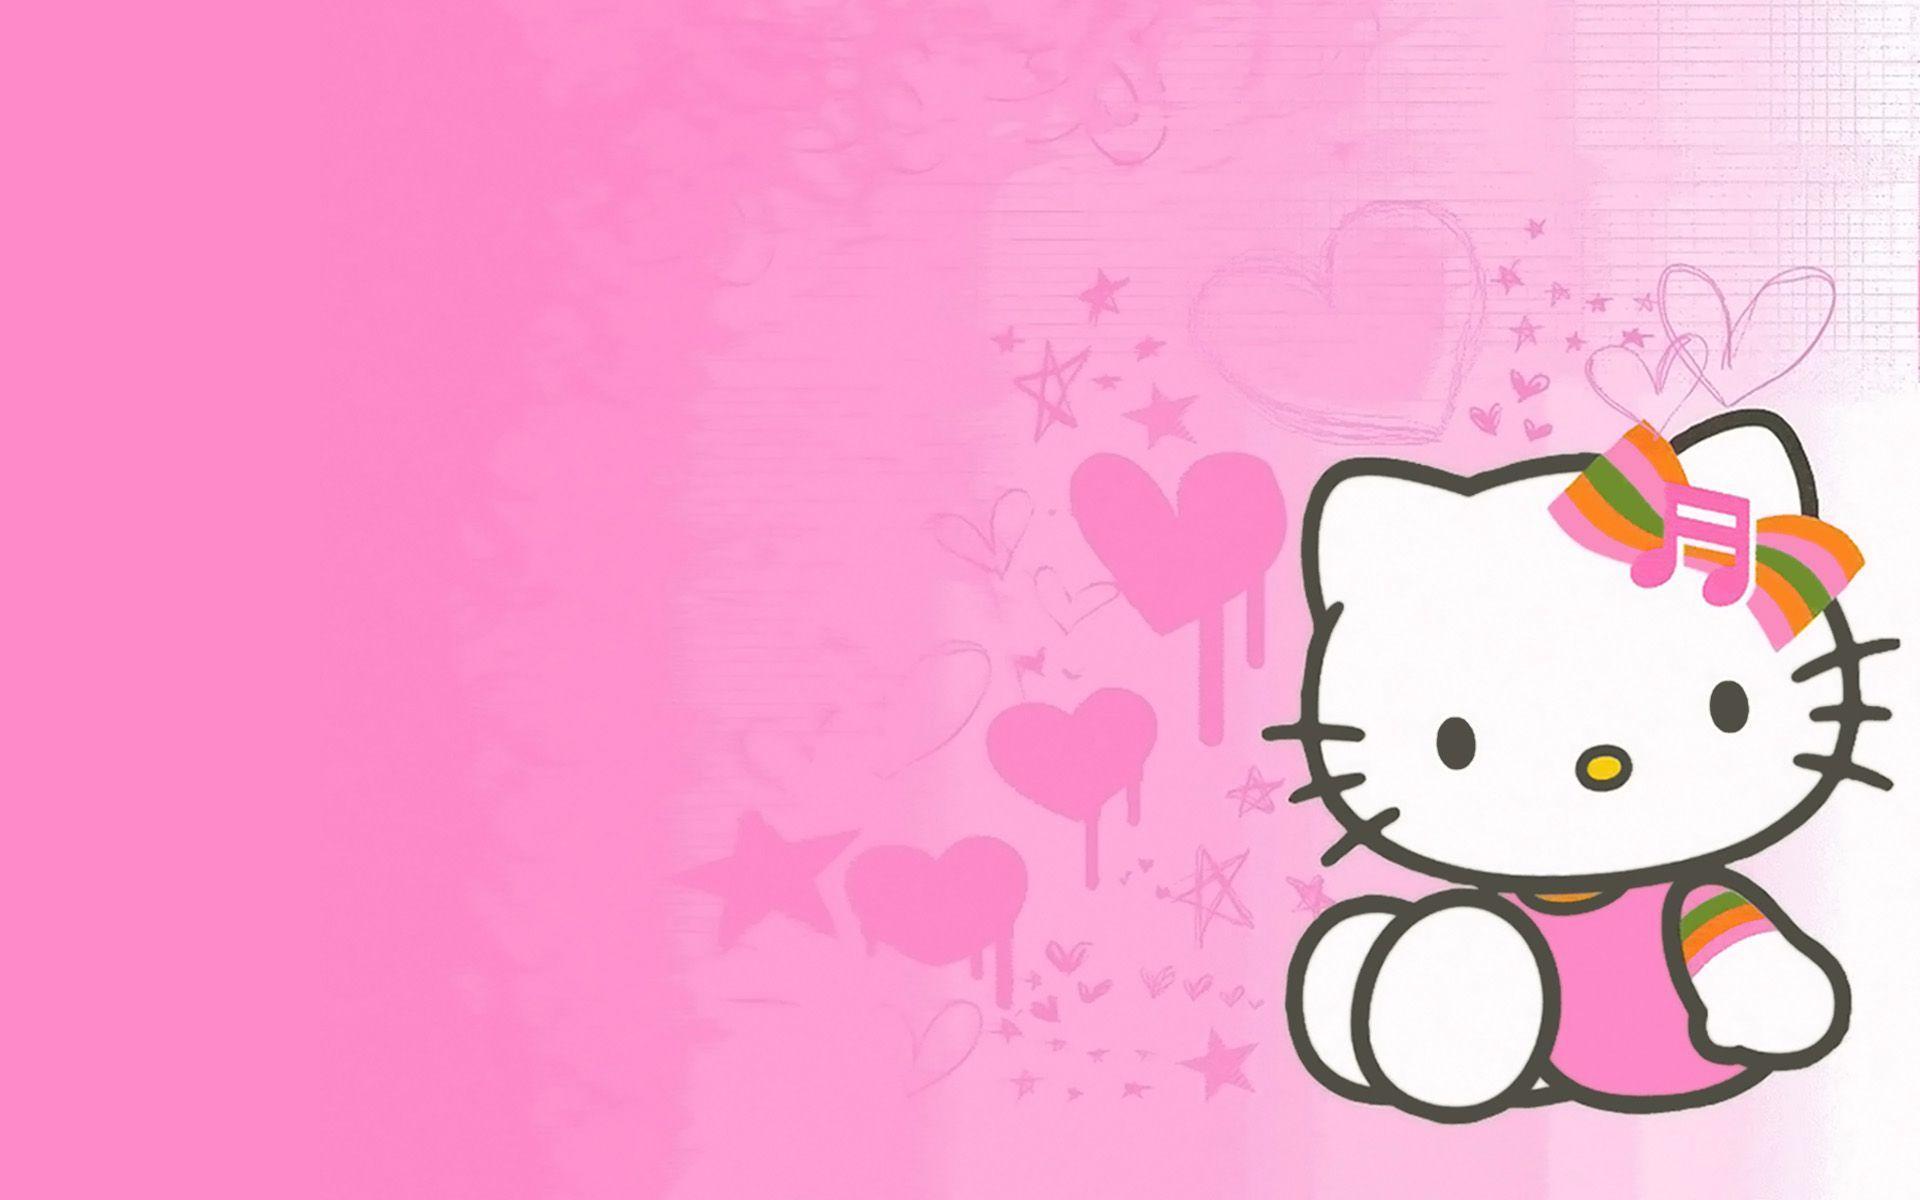 Wallpaper Backgrounds Hello Kitty 1920x1200